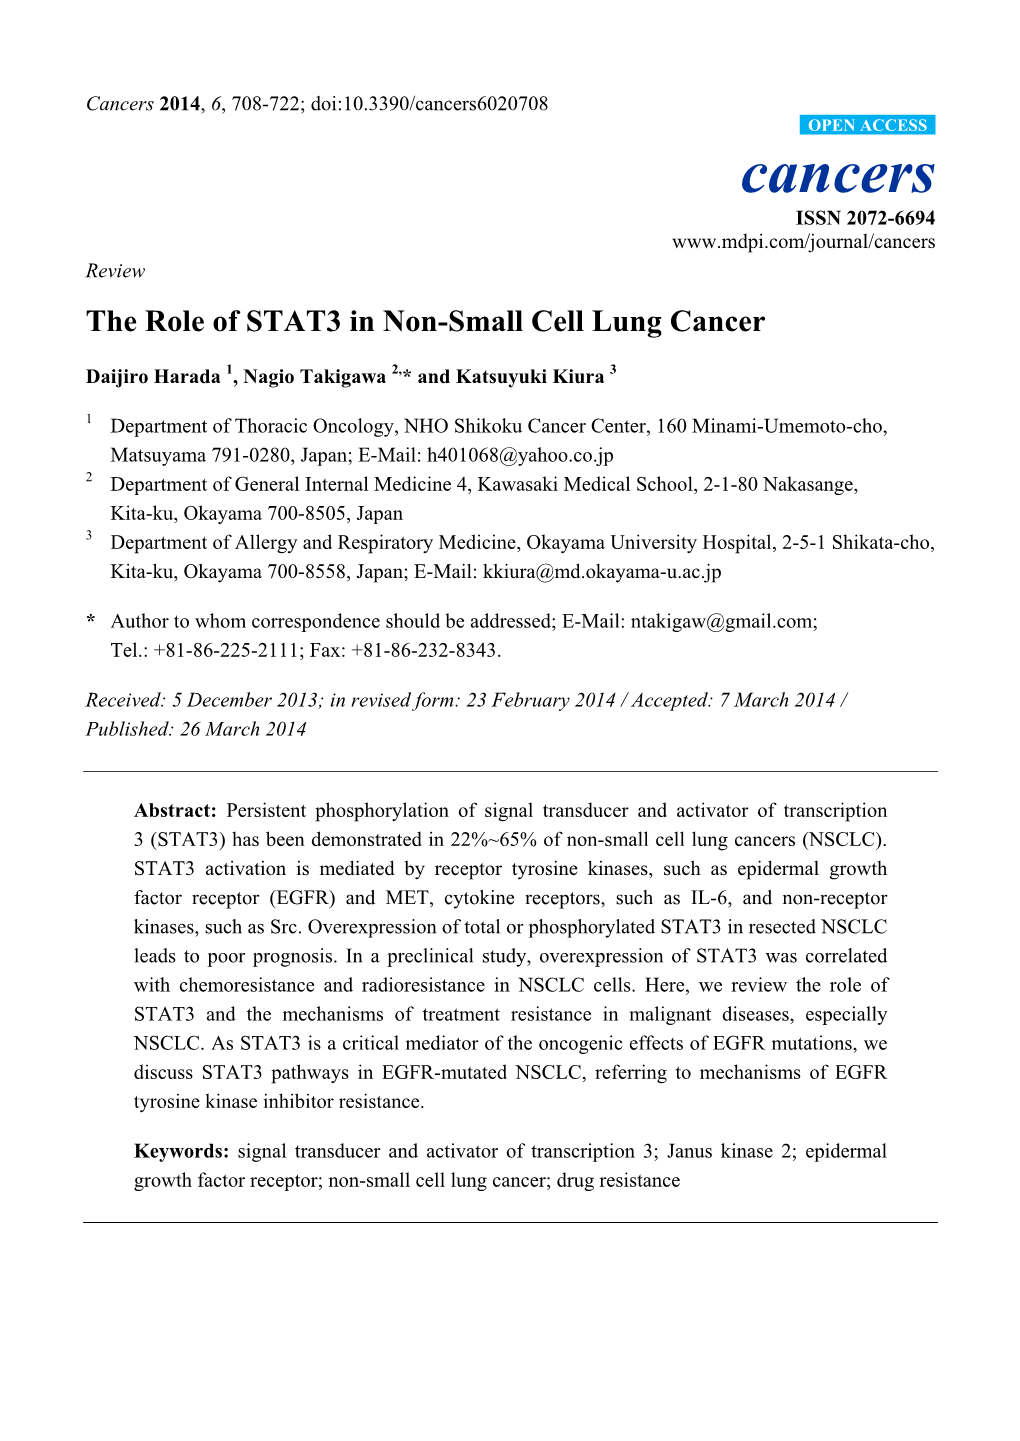 The Role of STAT3 in Non-Small Cell Lung Cancer